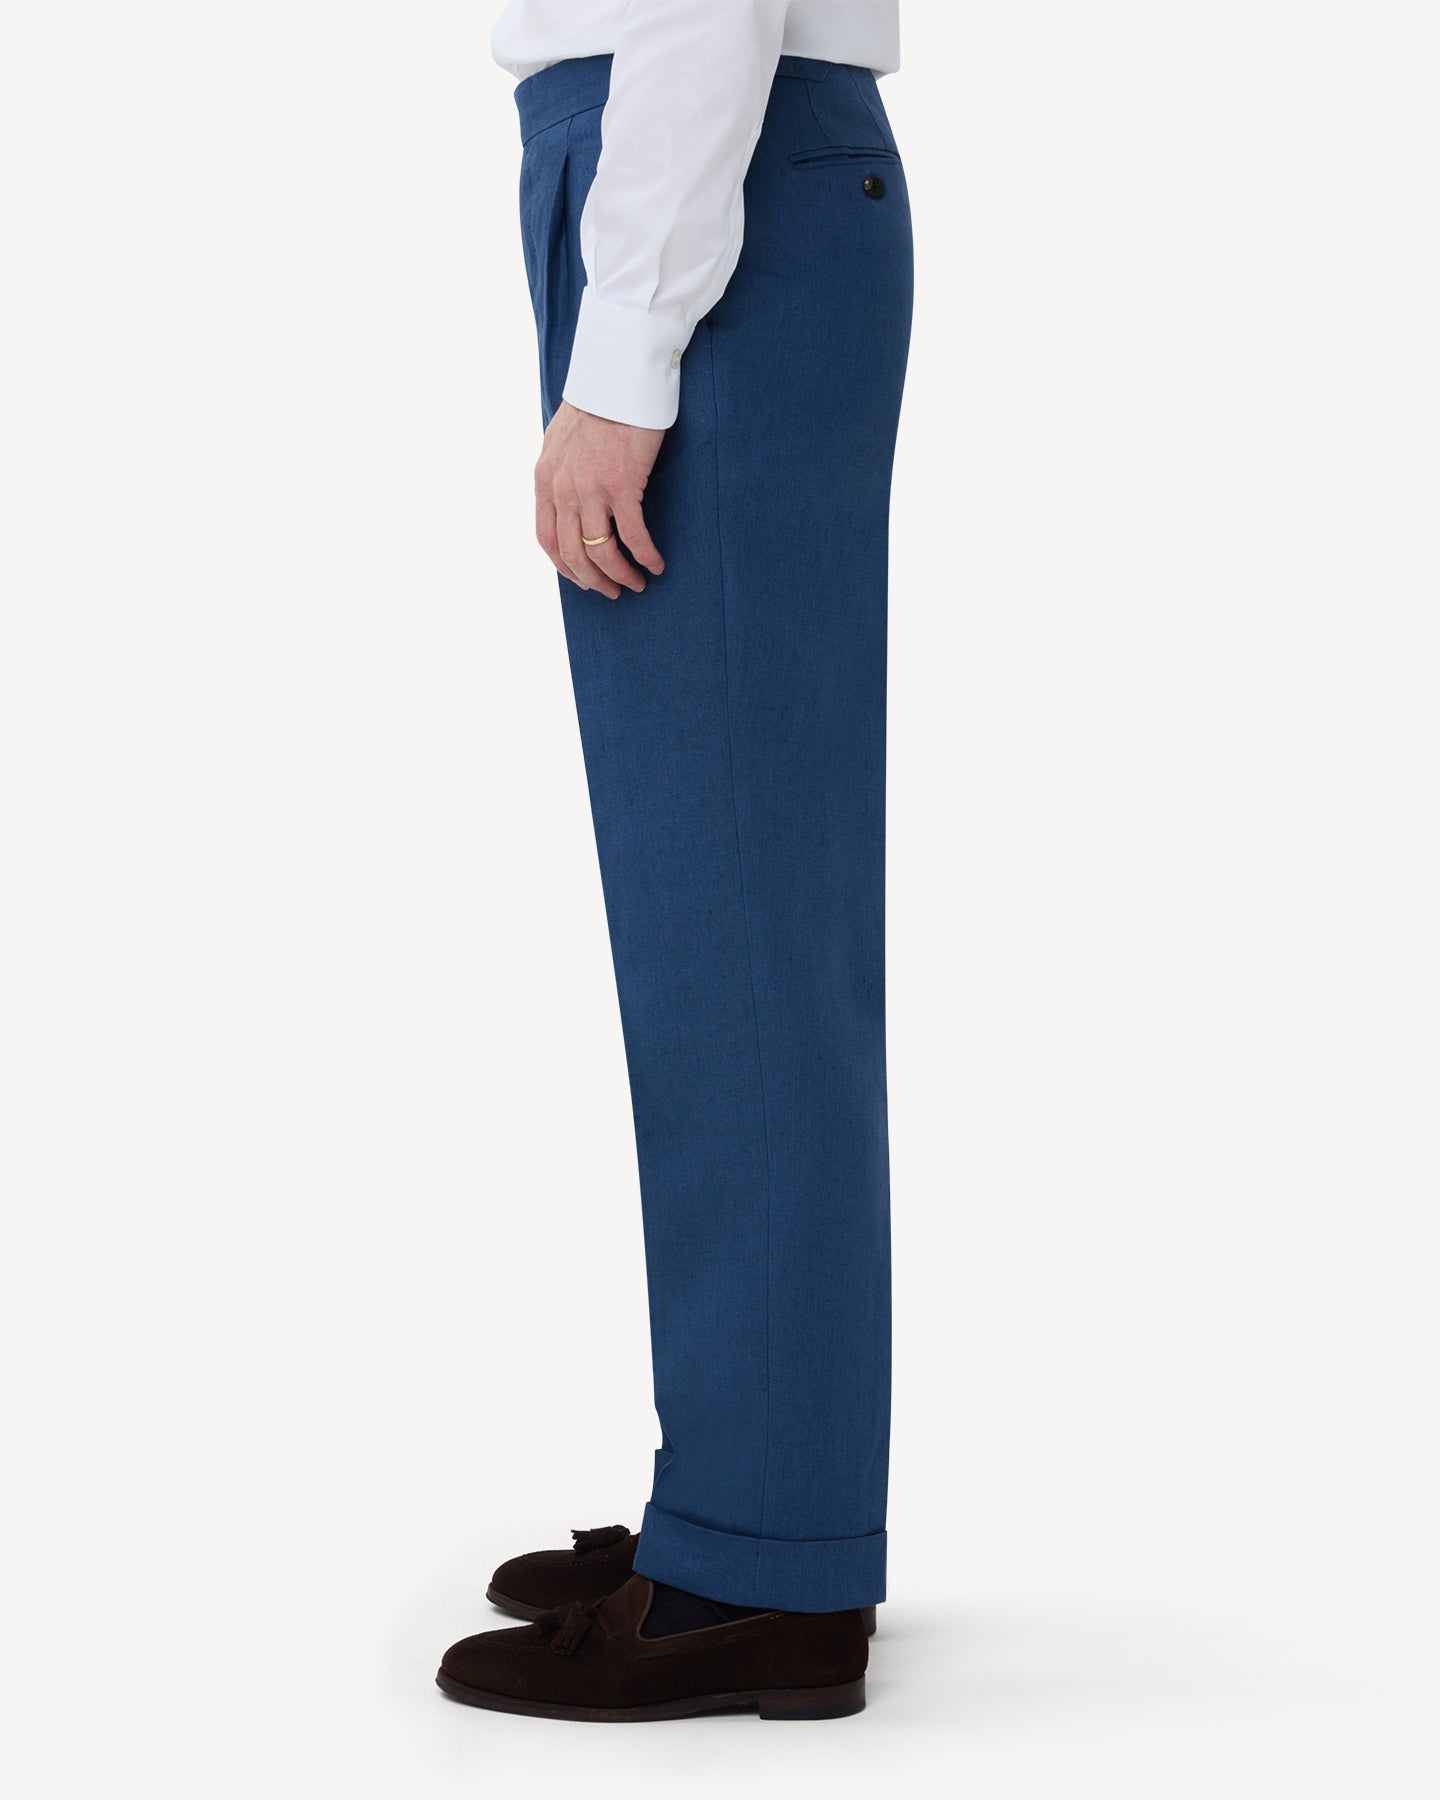 The side of blueberry linen trousers with single pleats and side adjusters